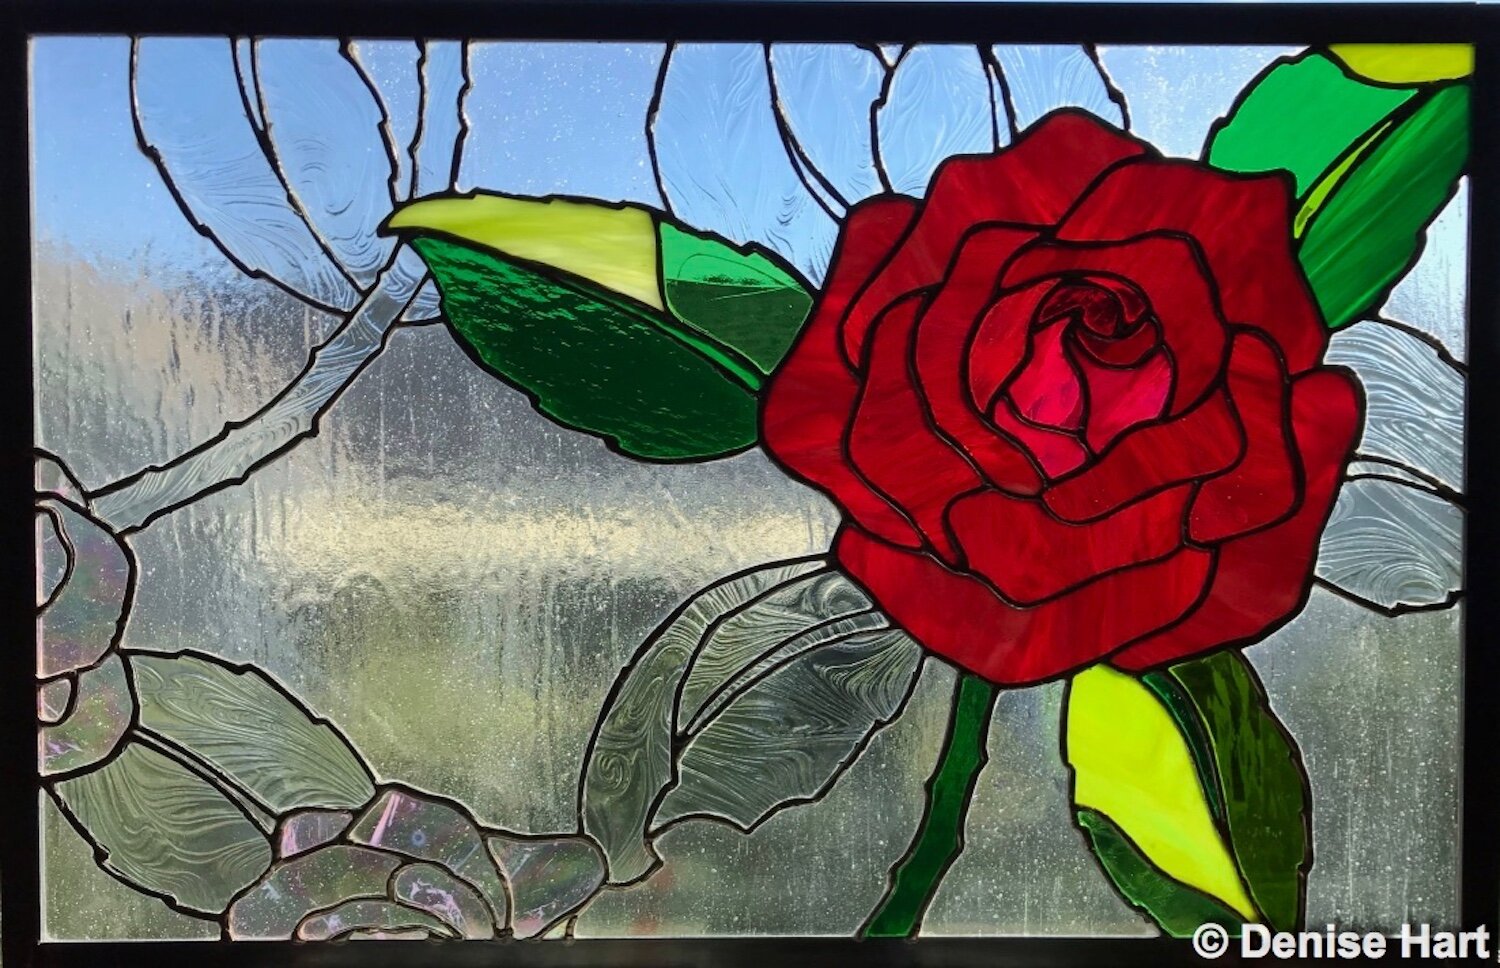 Rose stained glass window